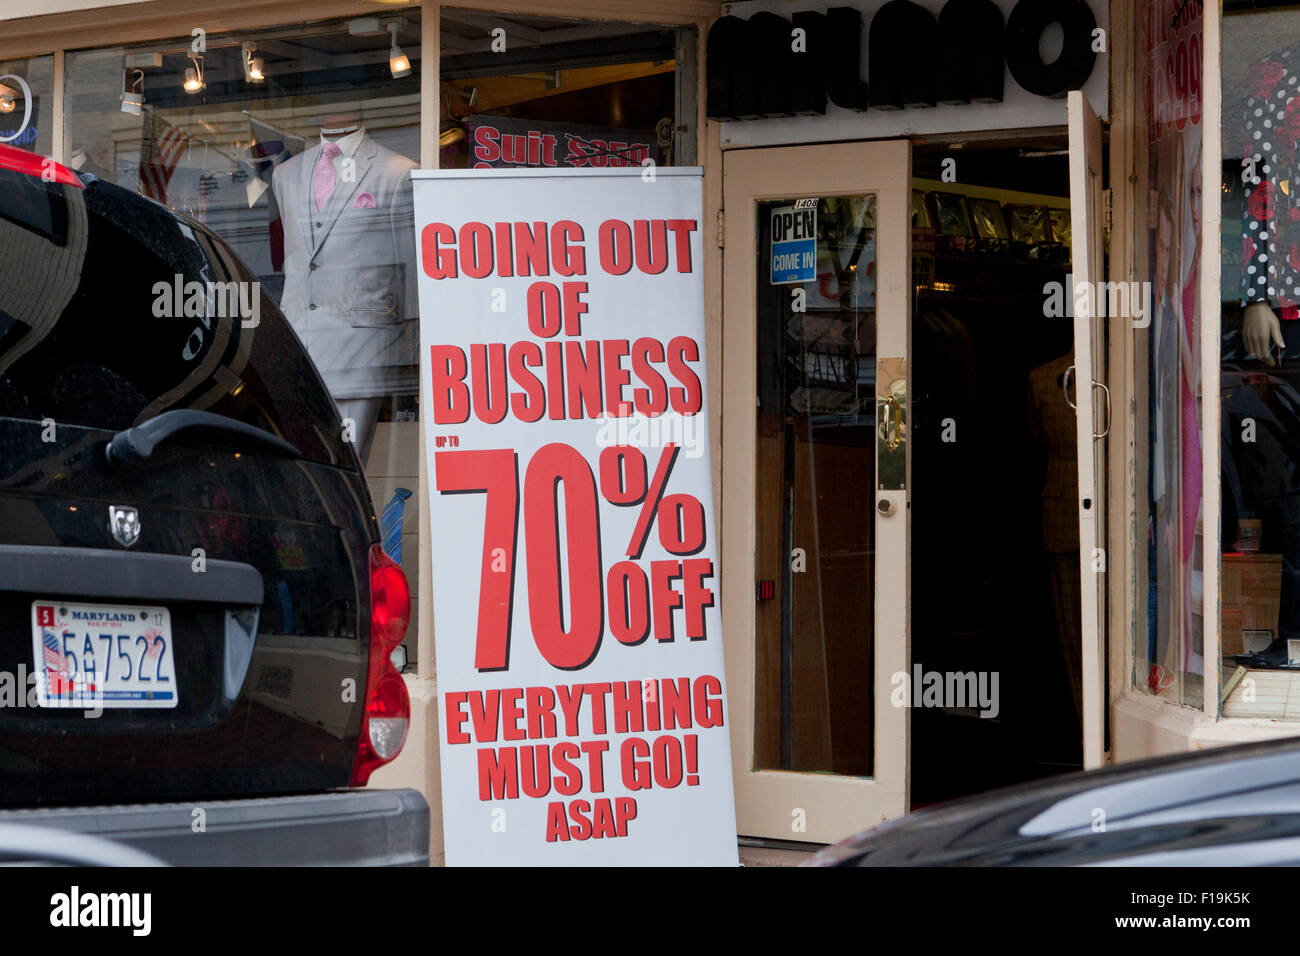 Going Out of Business sign - USA Stock Photo